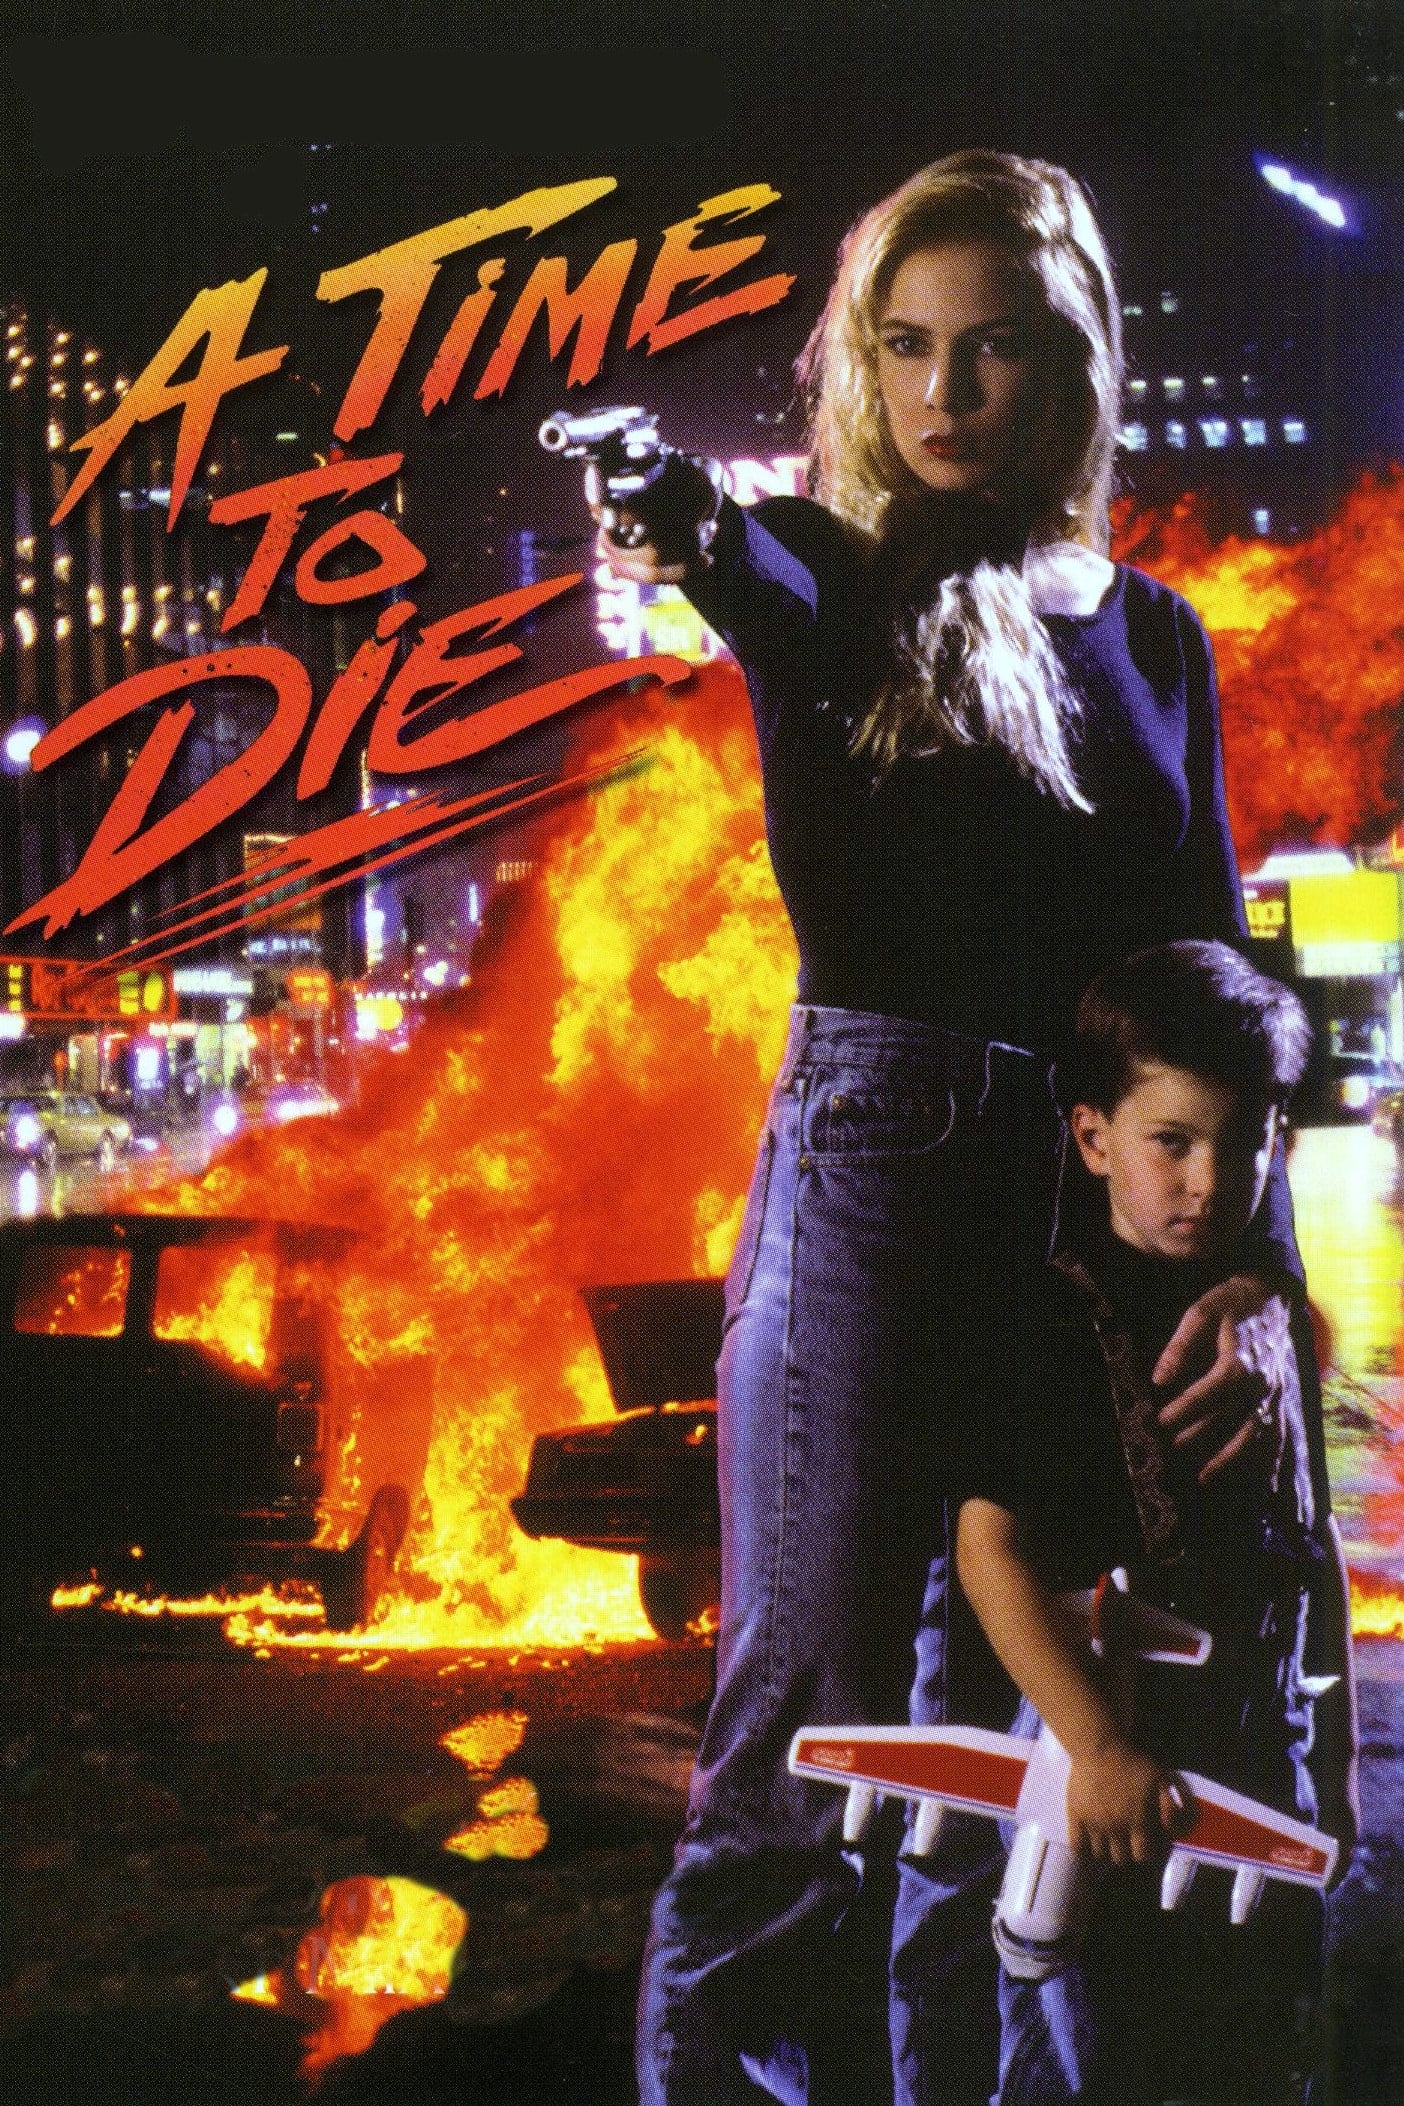 A Time to Die (1991)